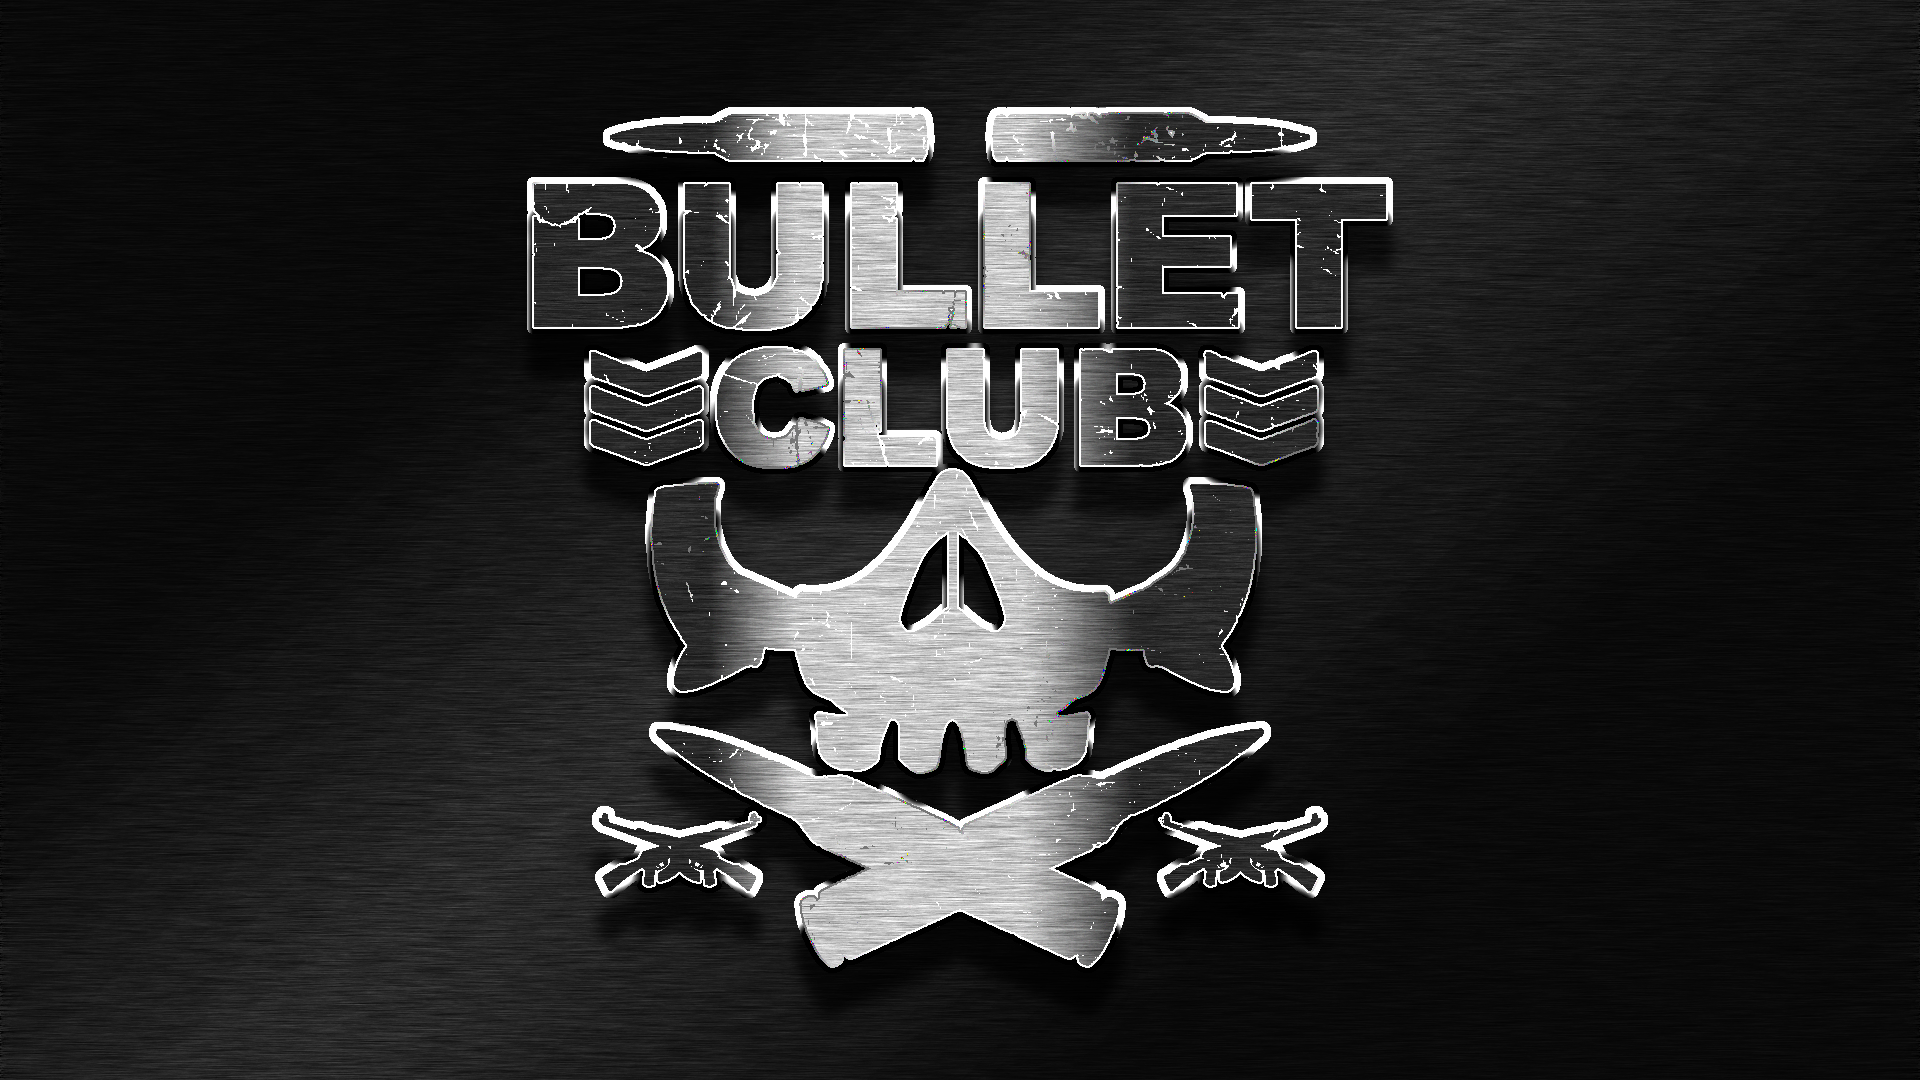 Bullet Club Logo Wallpaper 1080p By Darkvoidpictures On